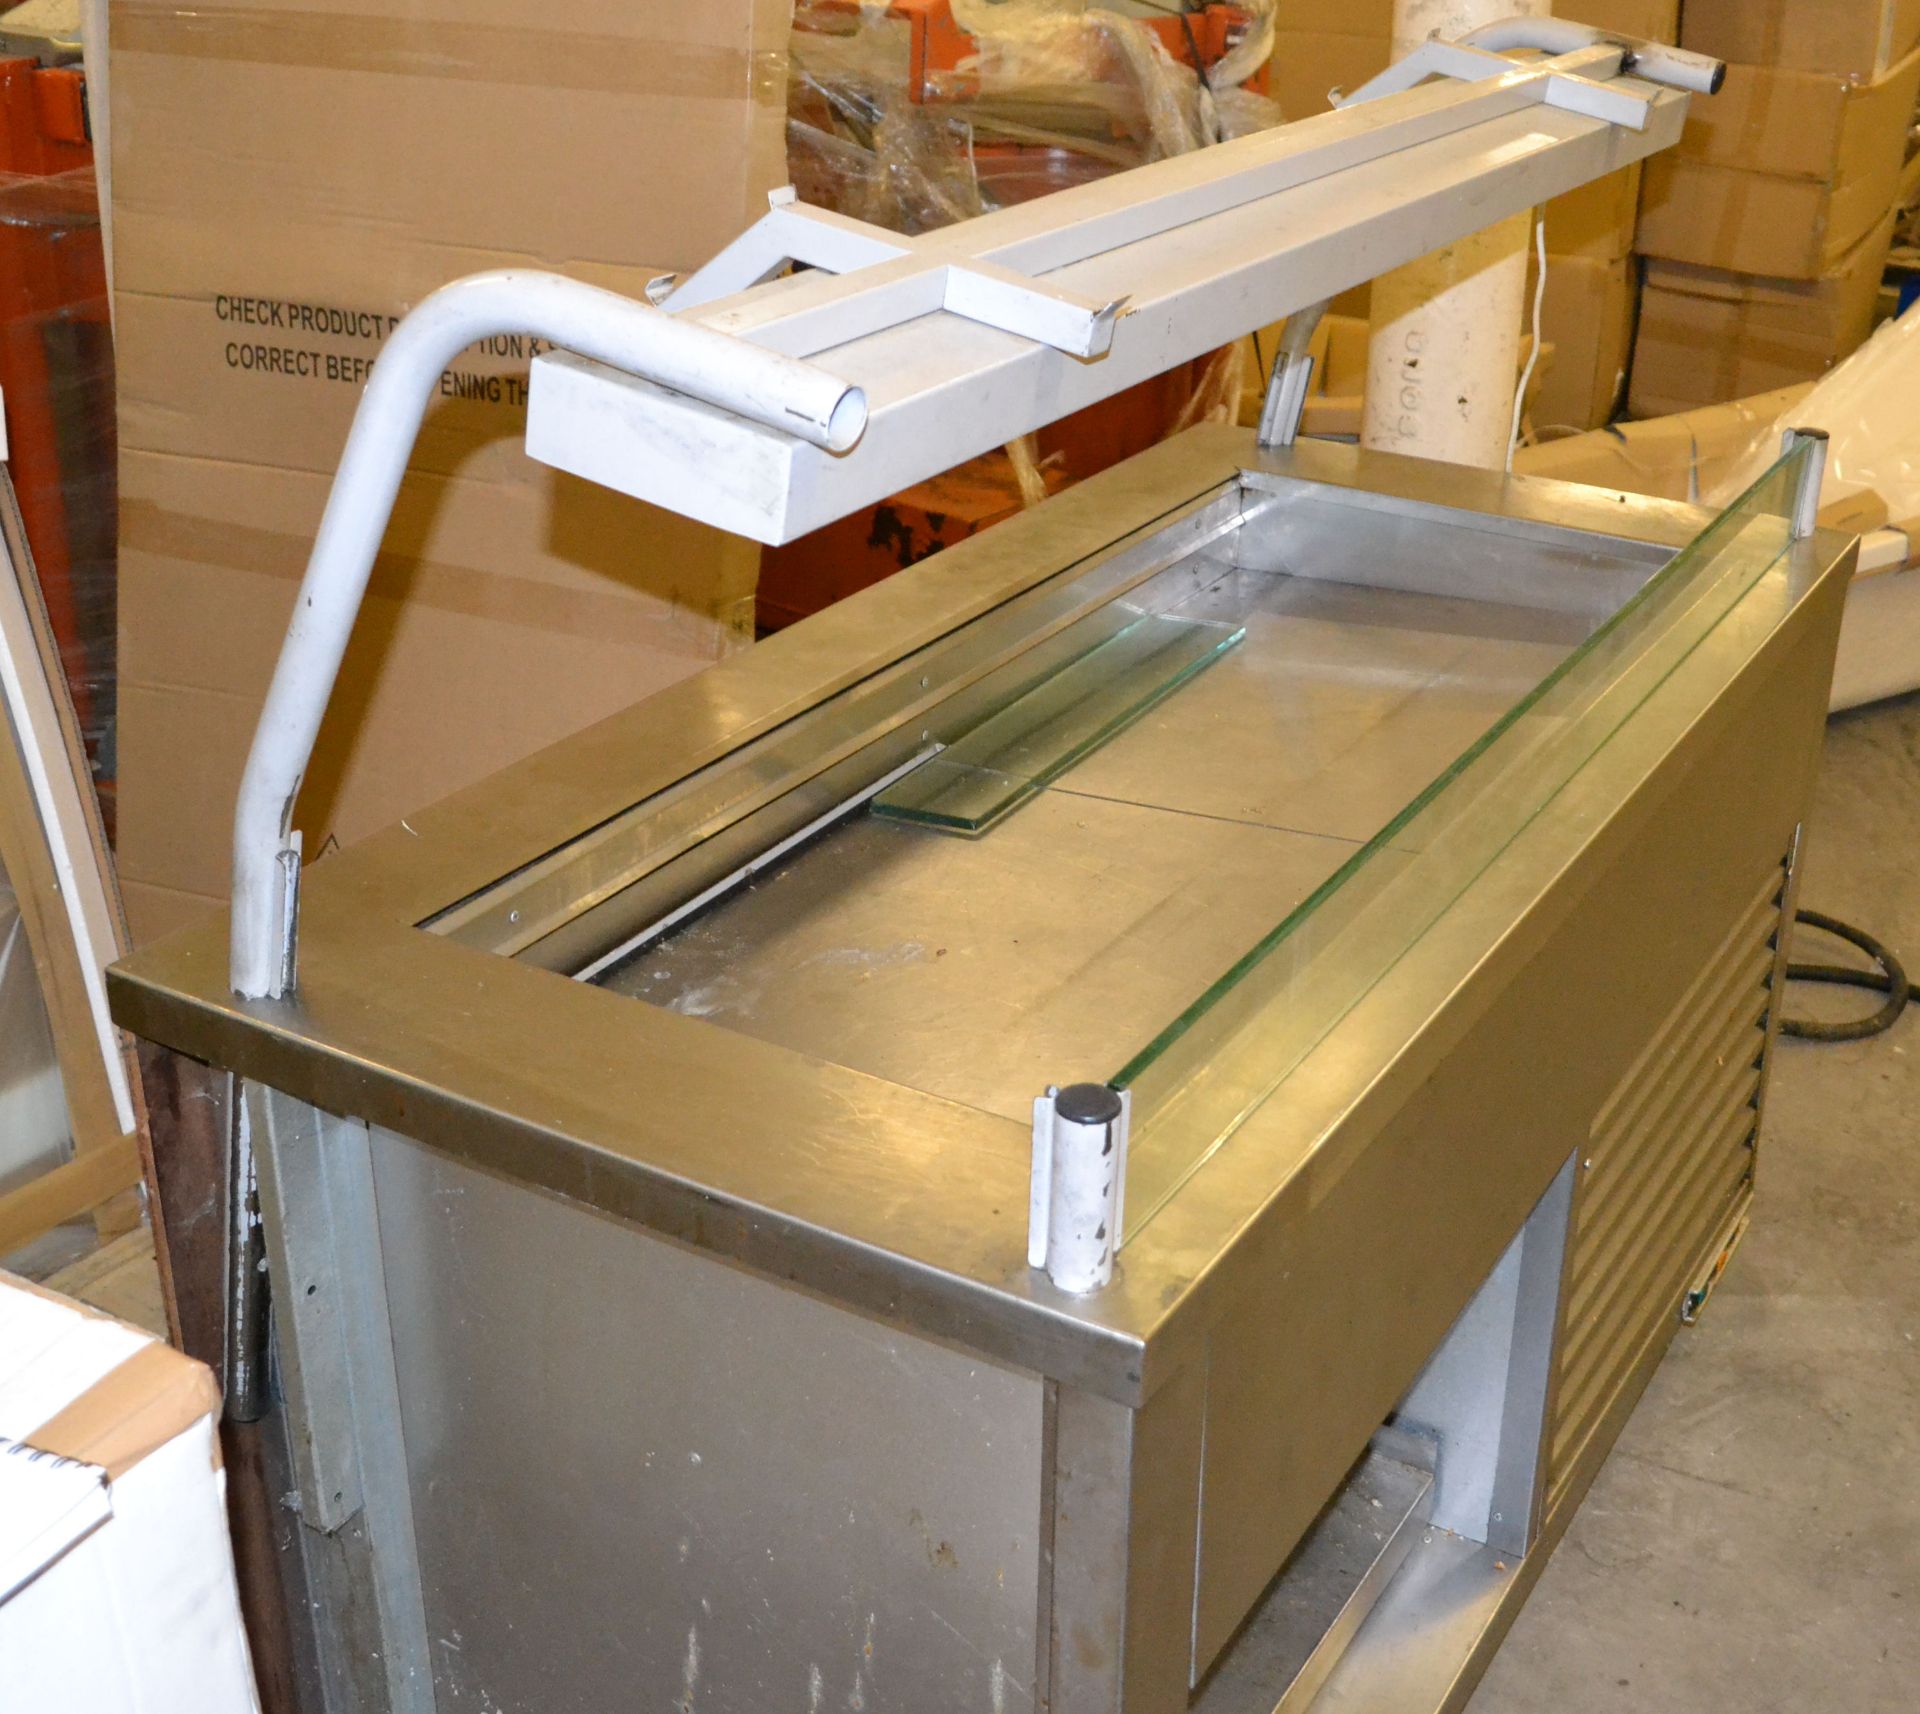 1 x Advanced Catering Equipment 1500BADW 240V Chilled Counter - Details to follow - Ref: FJC011 - - Image 5 of 10